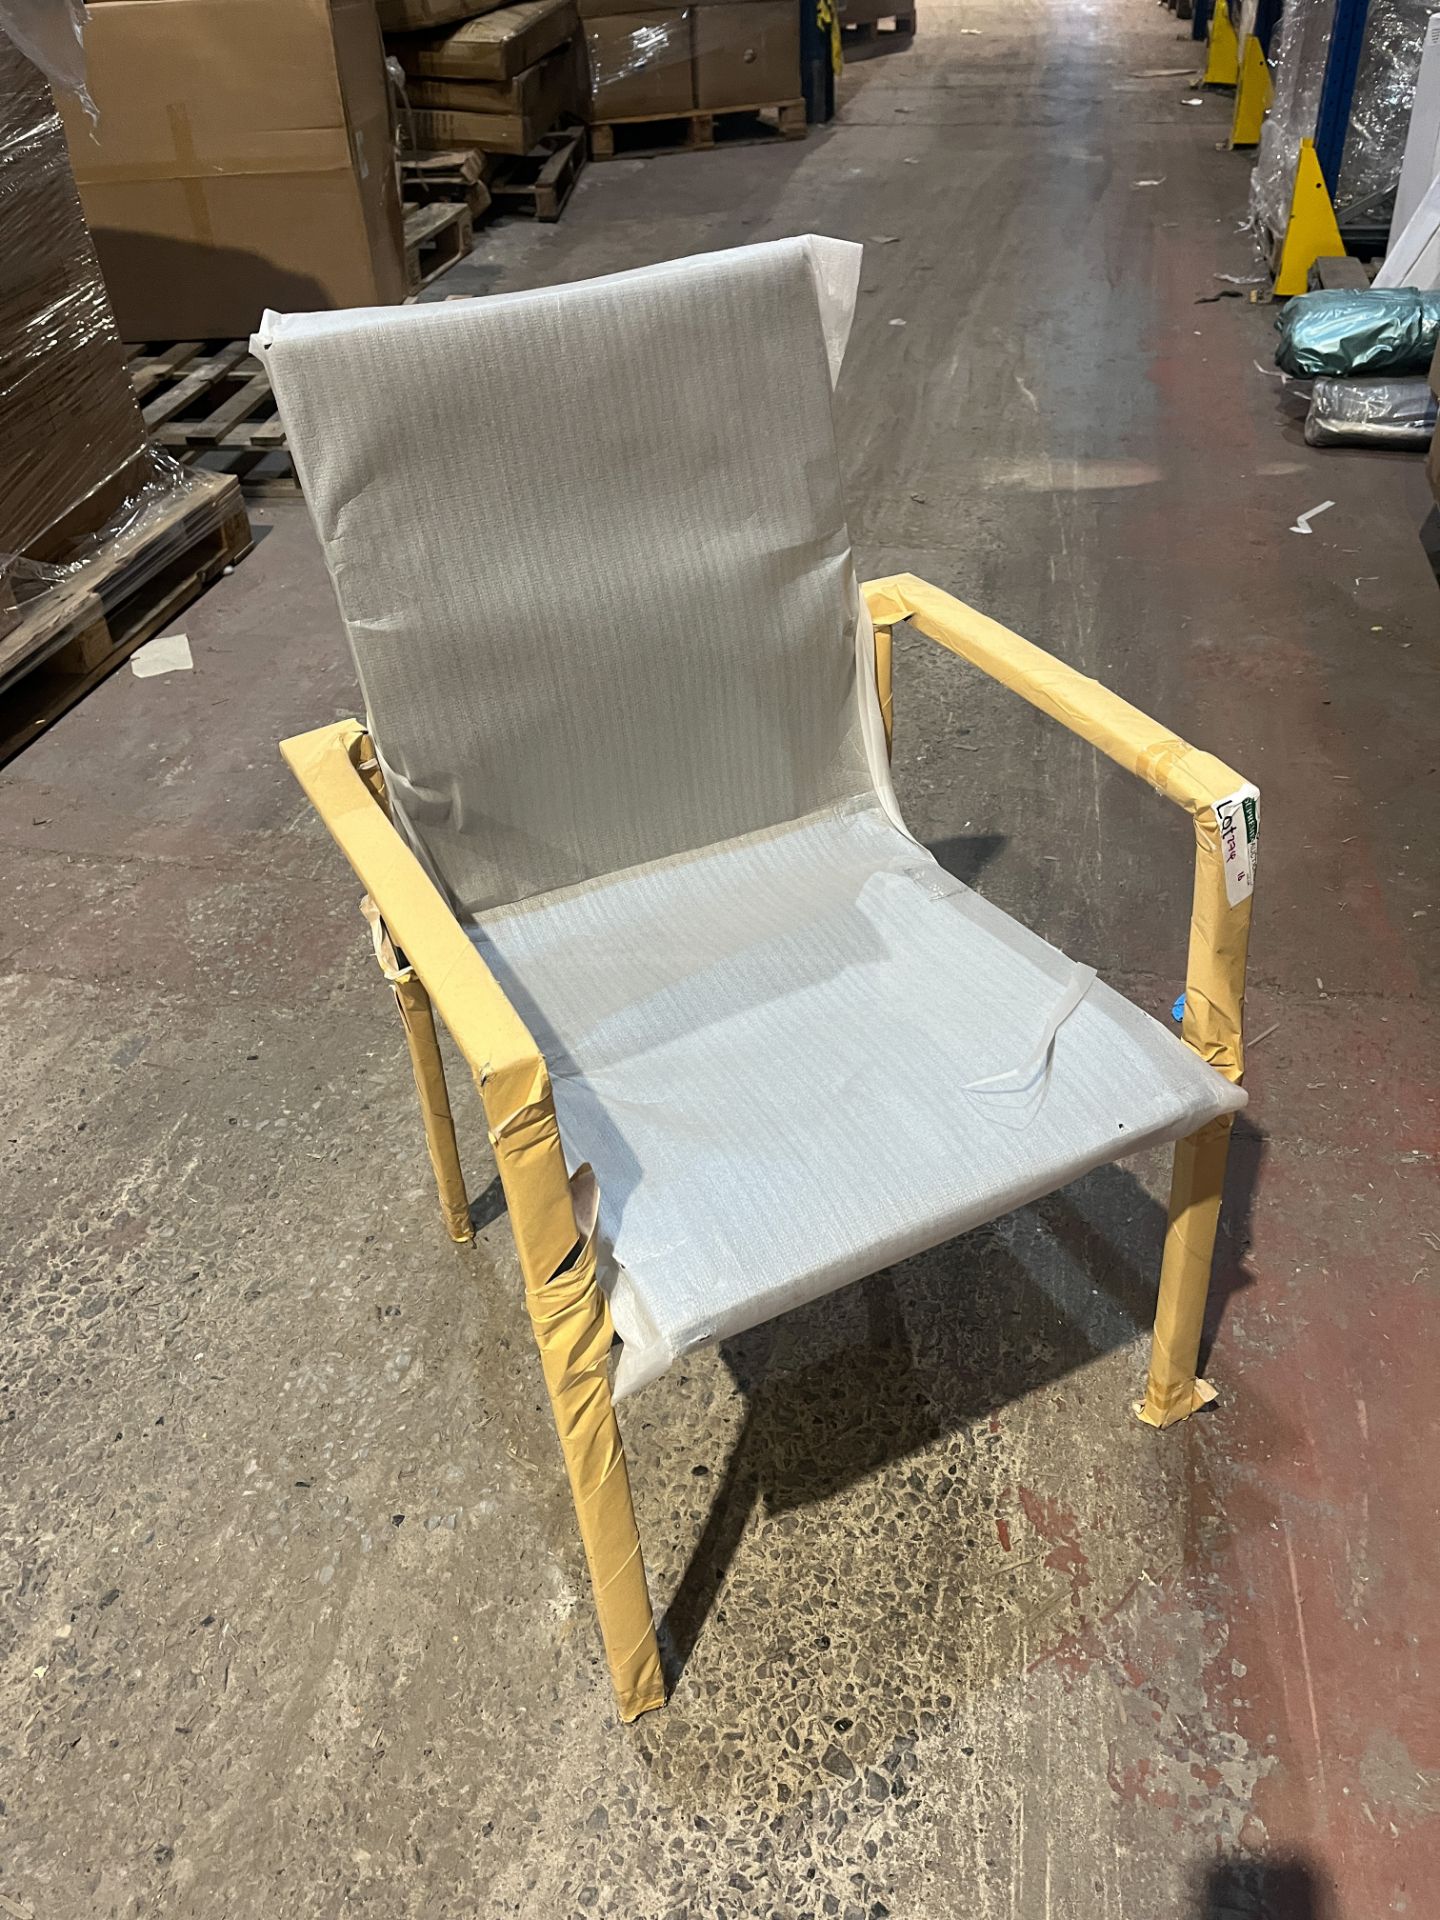 4 X BRAND NEW PREMIUM OUTDOOR DINING CHAIRS R18-2